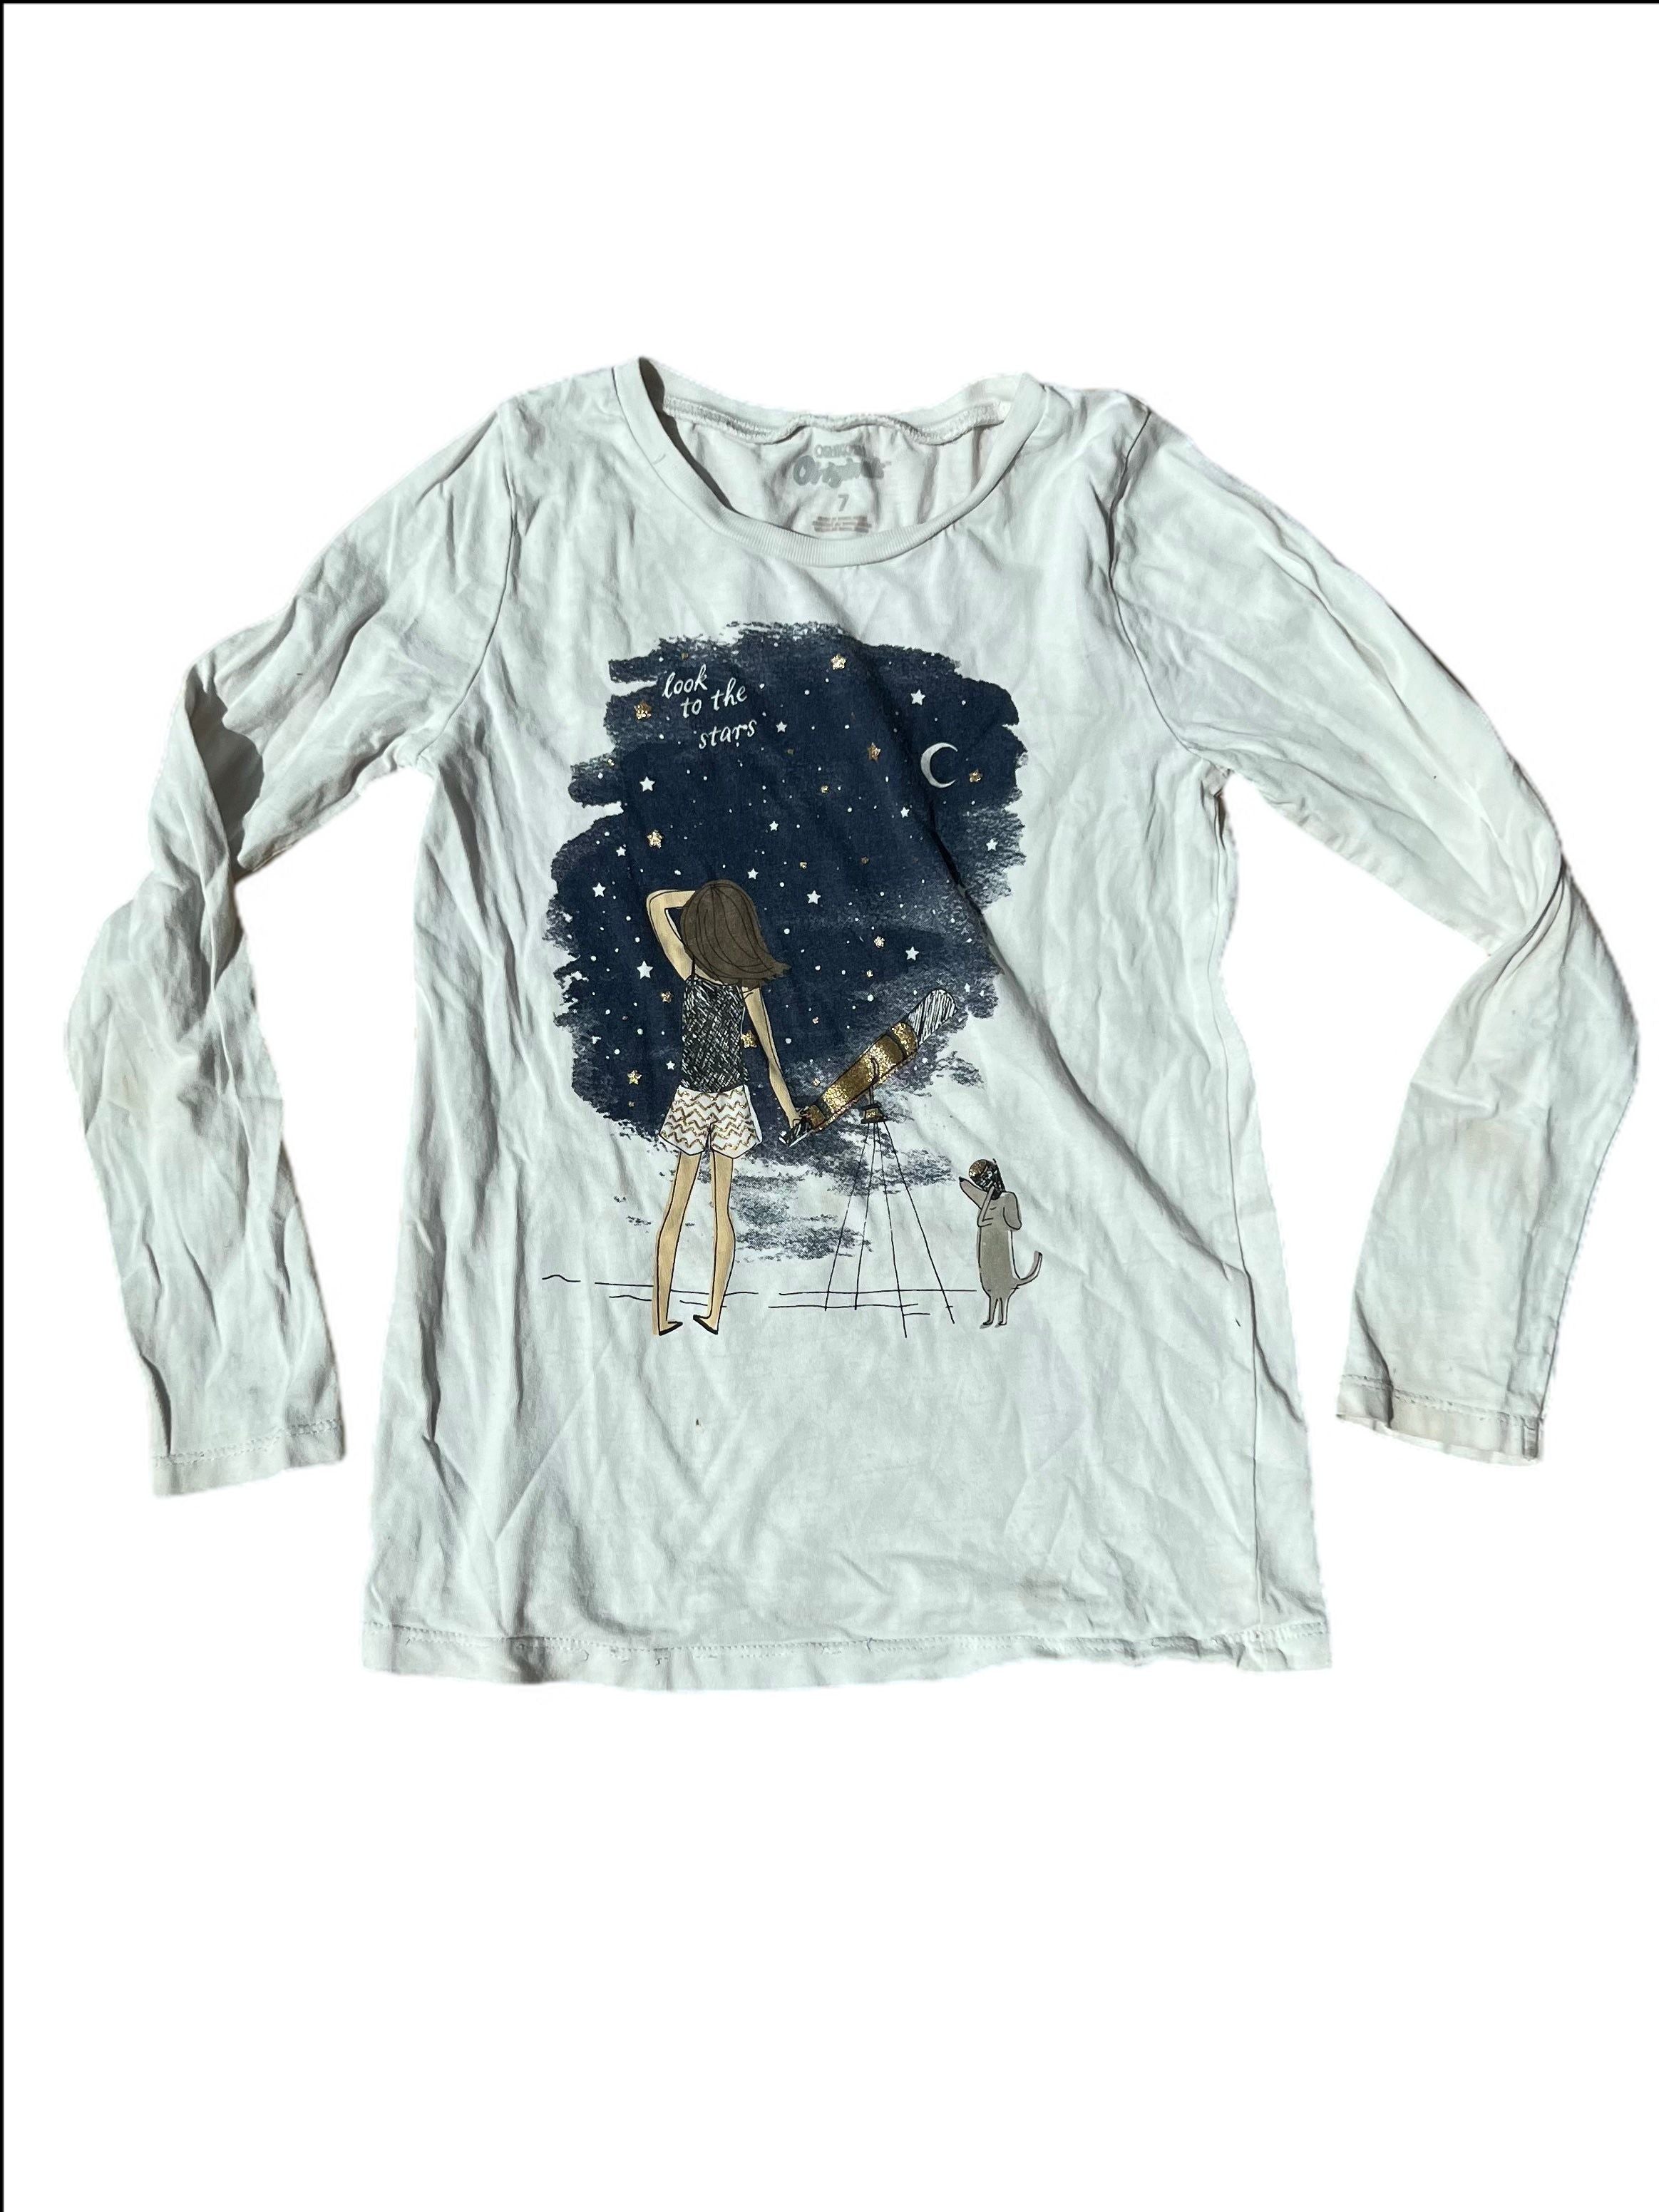 Long Sleeve “Look to the Stars” Top